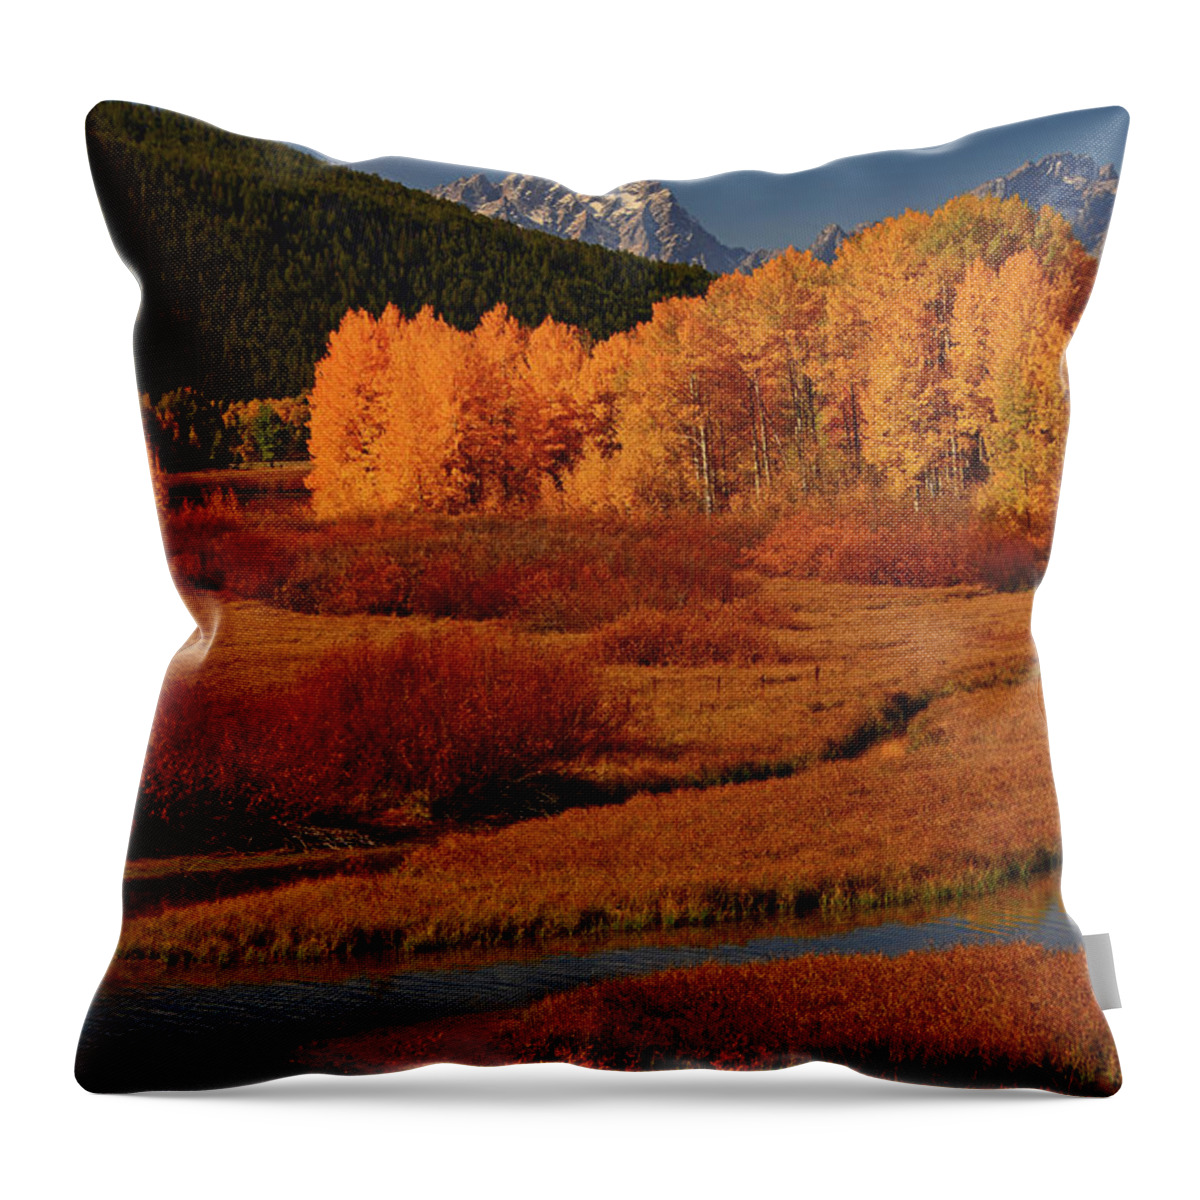 The Cathedral Group From North Of Oxbow Bend Throw Pillow featuring the photograph The Cathedral Group from North of Oxbow Bend by Raymond Salani III